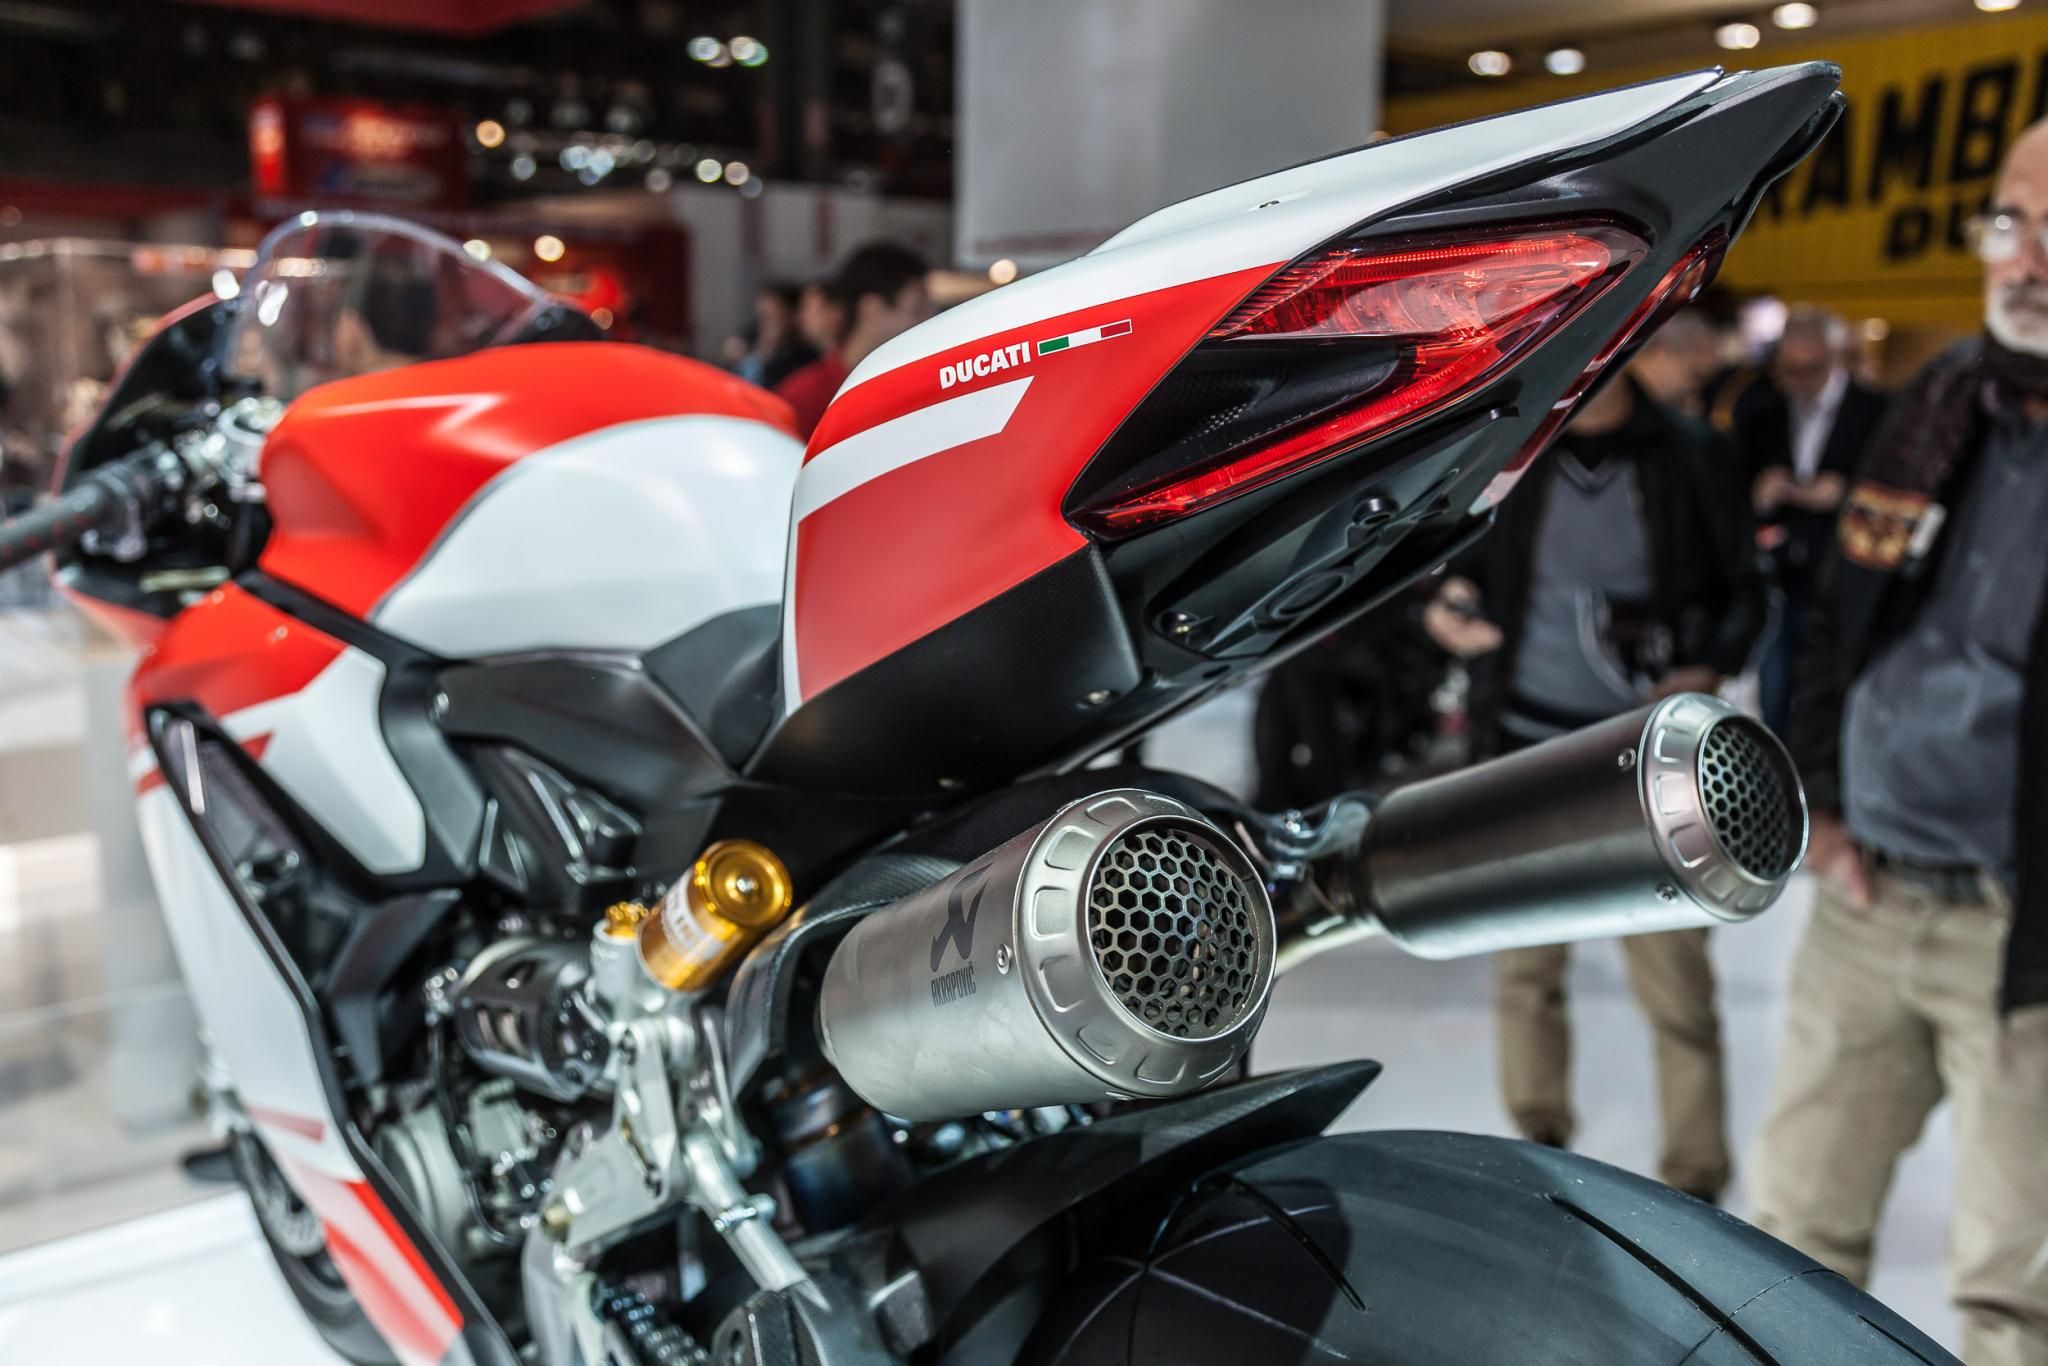 What To Expect From Ducati For 2017 - EatSleepRIDE